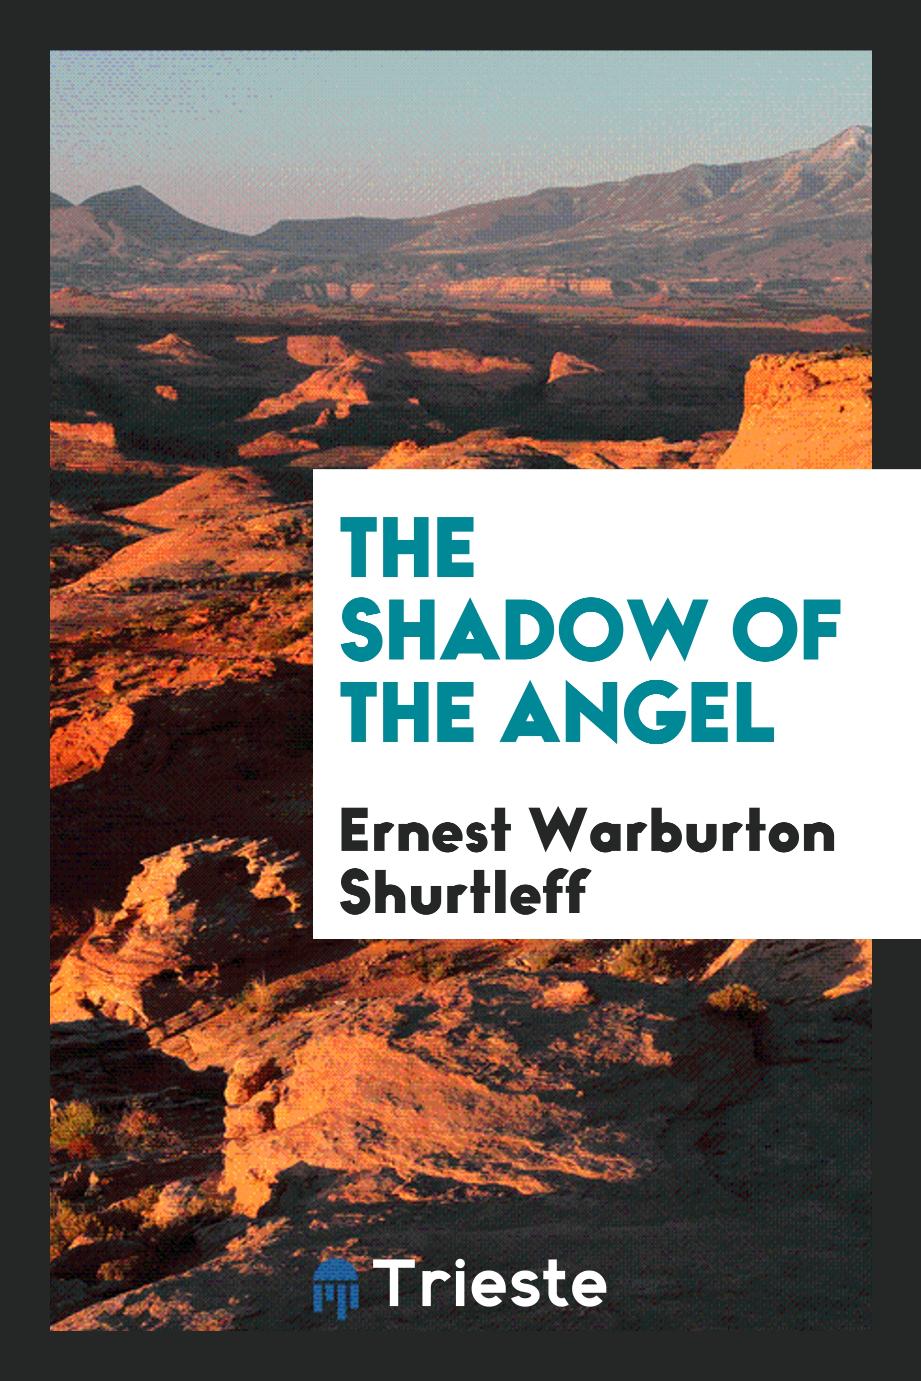 The shadow of the angel